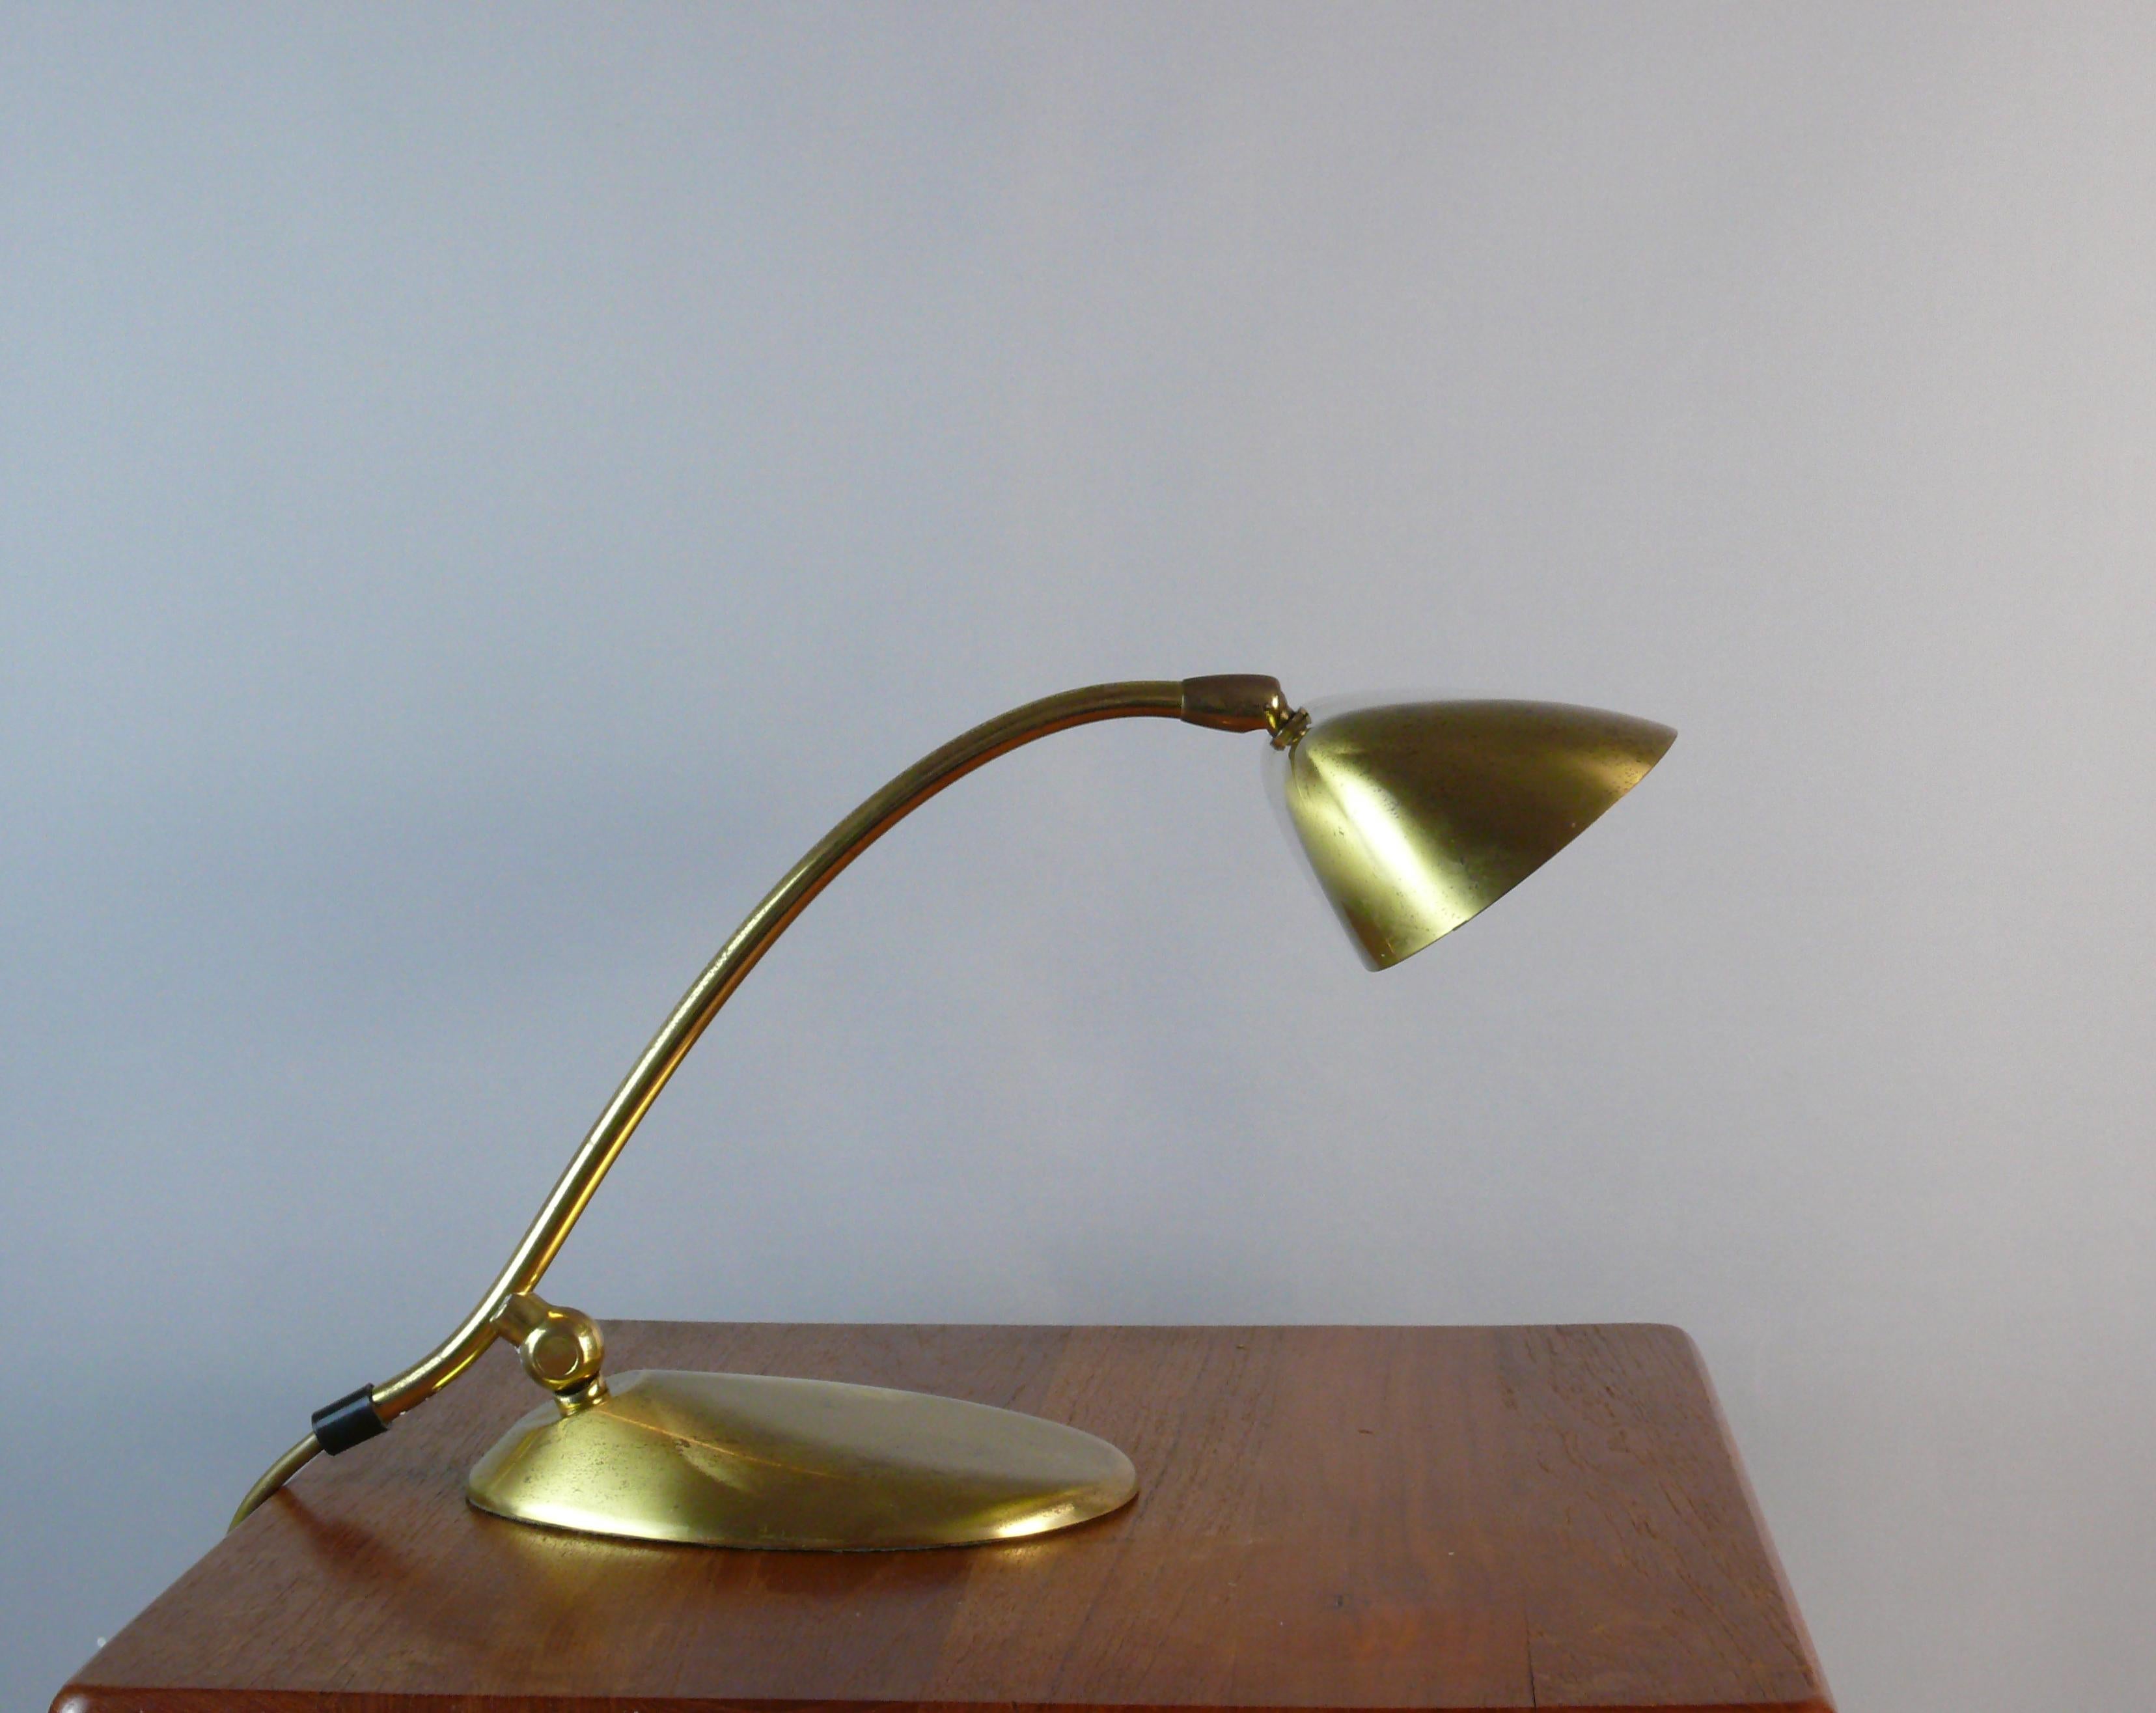 Very solid and rare piano lamp made of brass by JBS (Joseph Brumberg Sundern), West Germany, around the 1960s. The lamp impresses with its organic shape. The lamp is made of brass with a heavy metal base. The screen can be tilted with a ball joint.